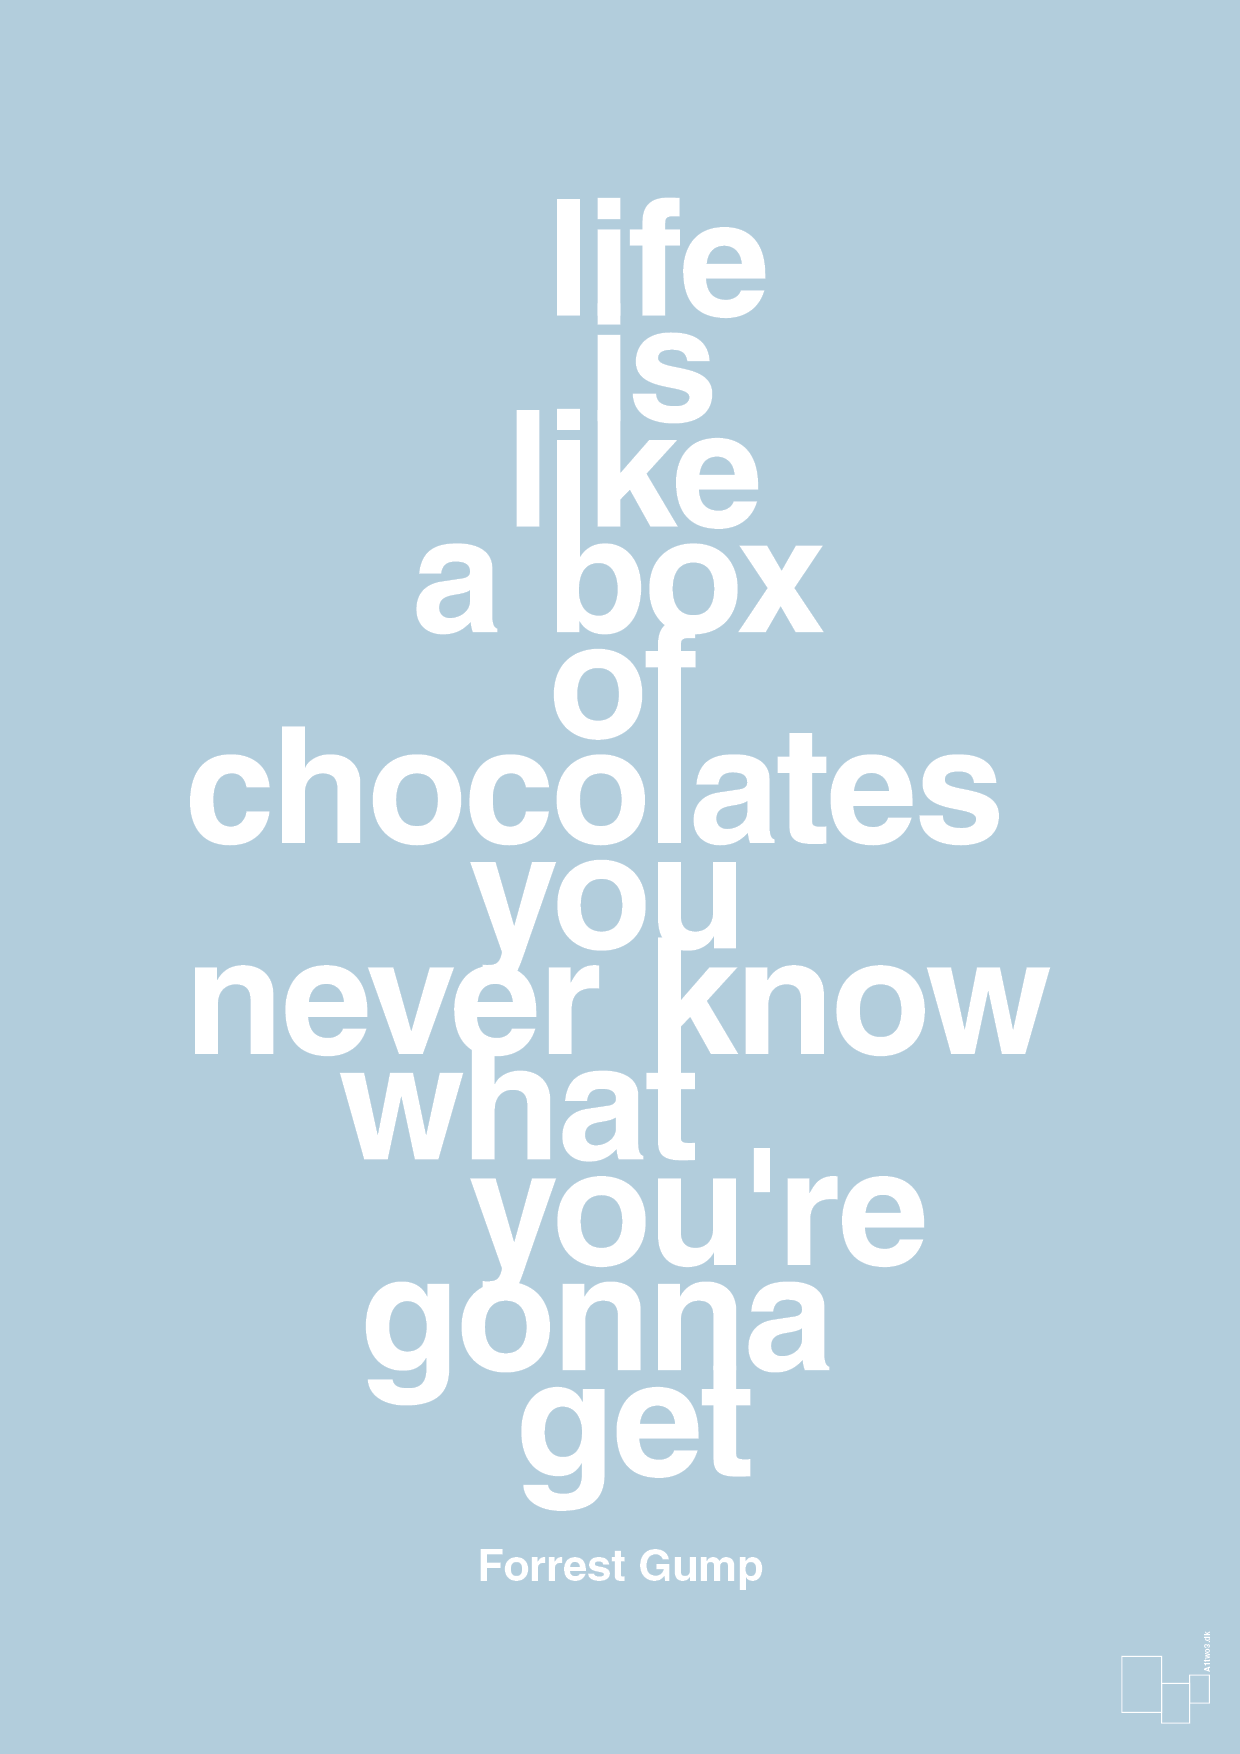 life is like a box of chocolates you never know what you're gonna get - Plakat med Citater i Heavenly Blue